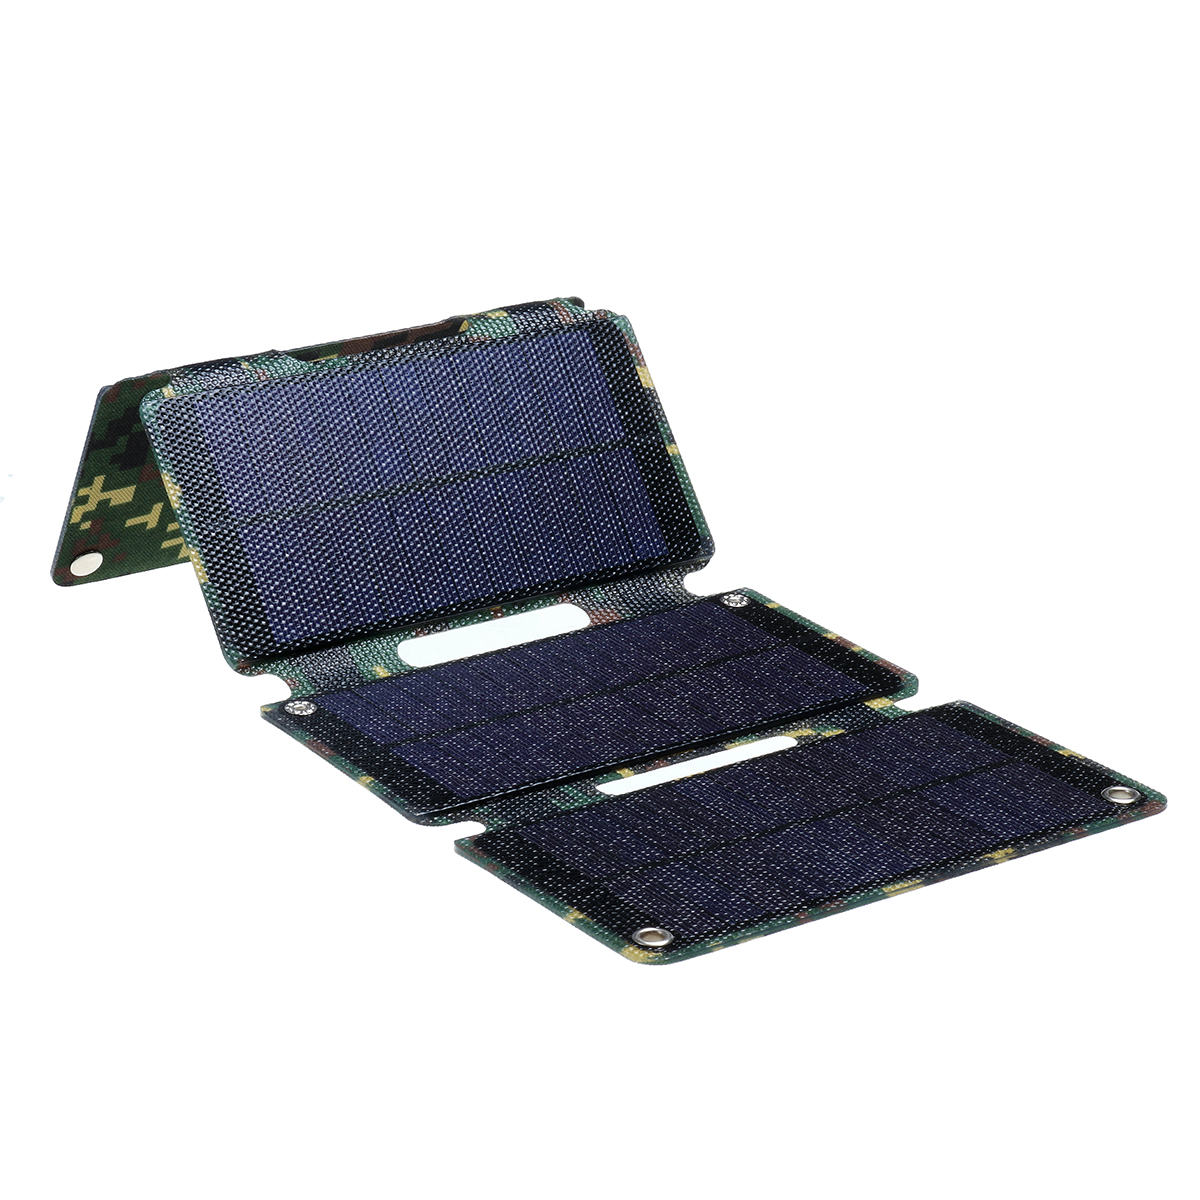 

18W USB ETFE Sunpower Foldable Solar Panel Outdoor Camping Power Bank Charger